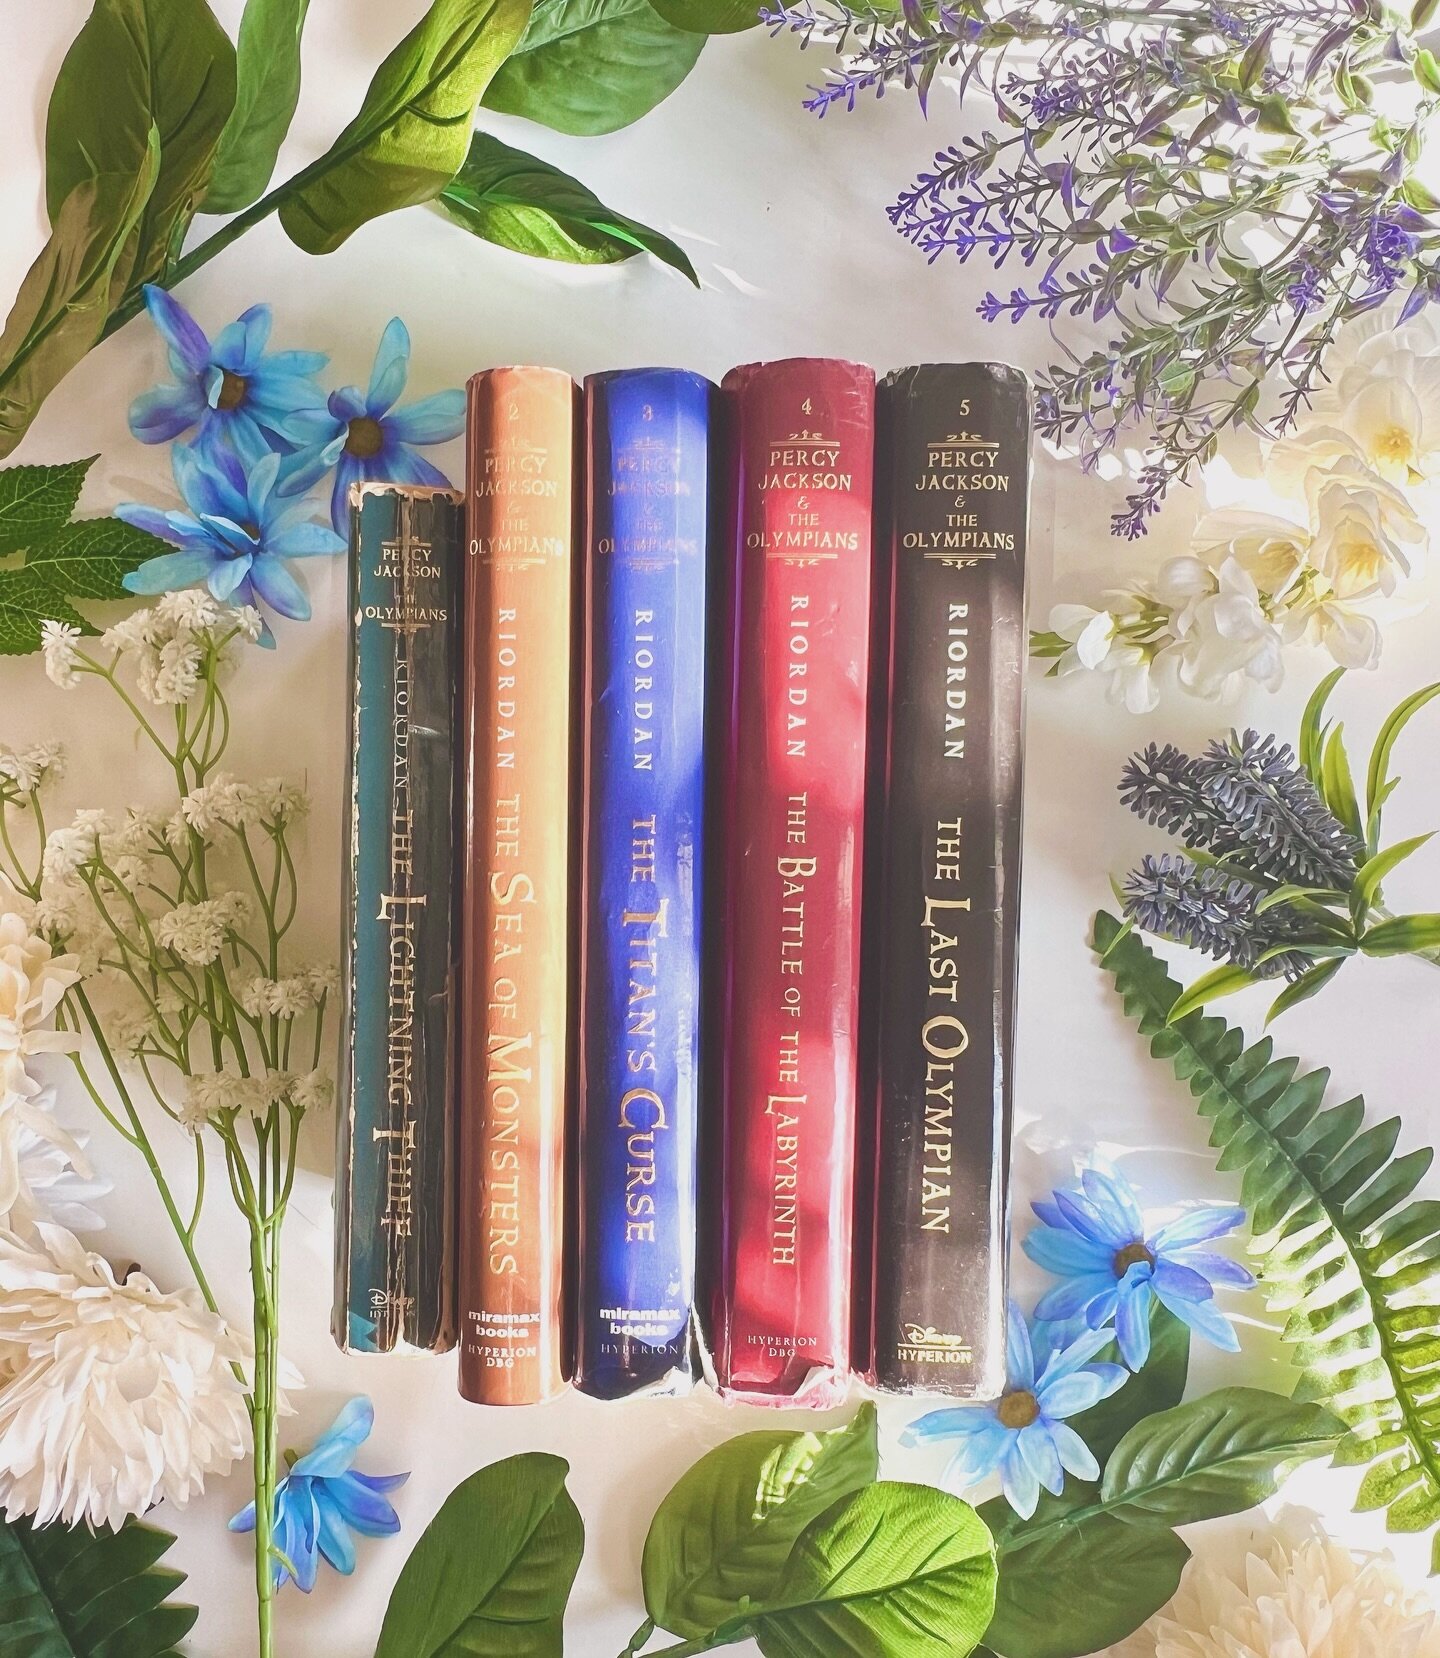 a love letter to the percy jackson books 💌

These books have seen a lot of love over the years, and these exact books have been in my hands since I was in middle school.

I recently reread the series in anticipation for the Disney+ show, and I felt 